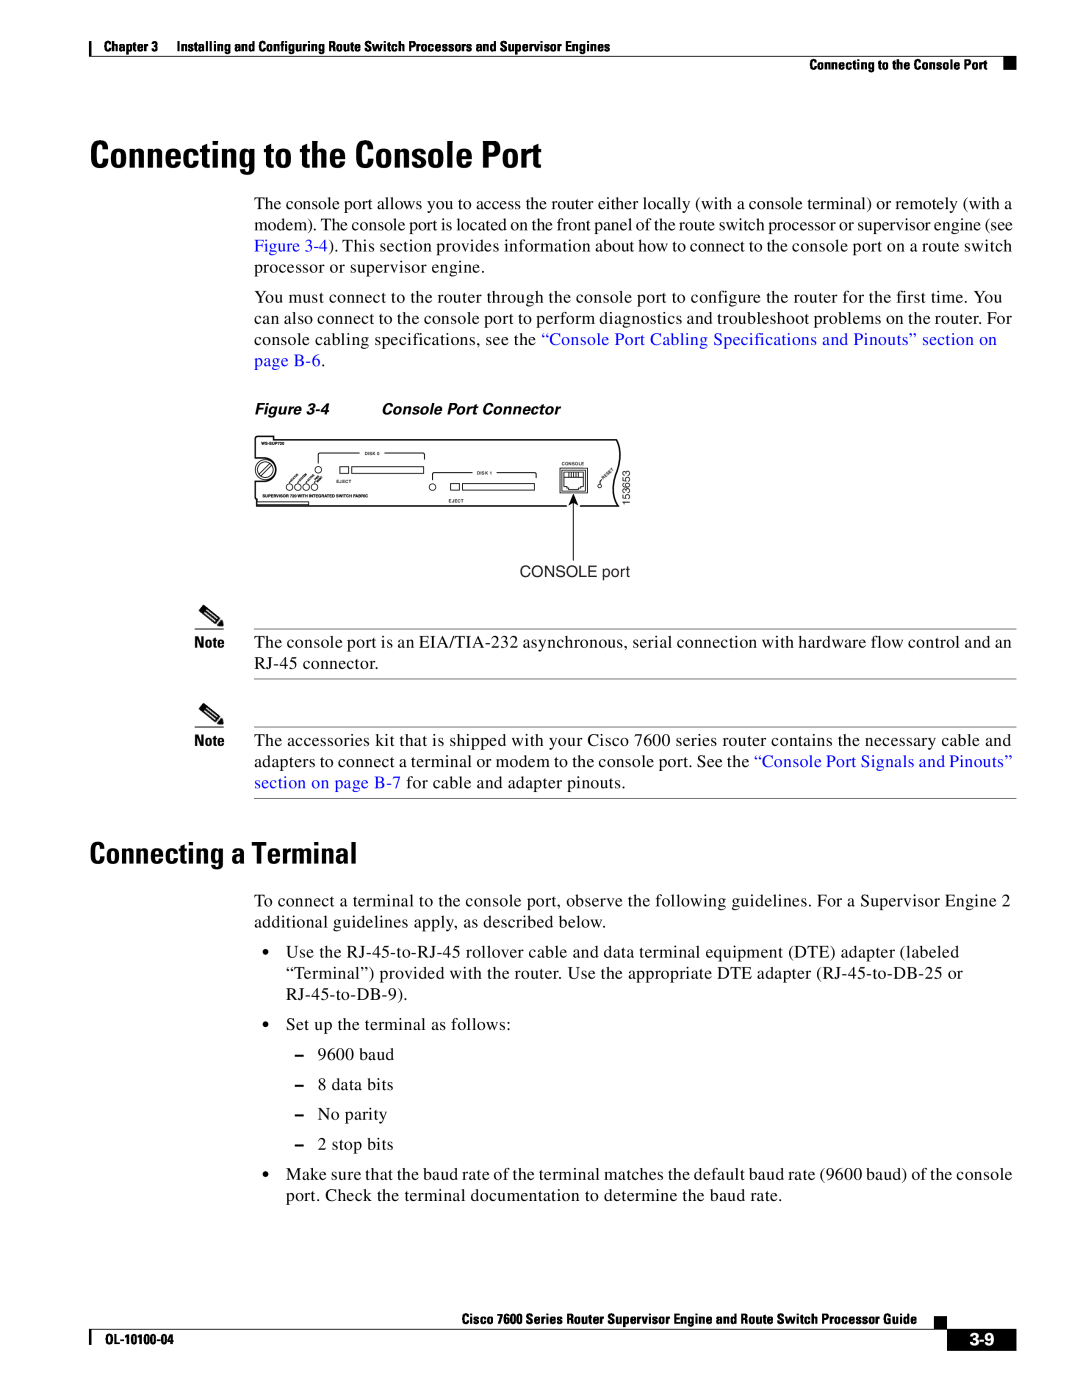 Cisco Systems 7600 manual Connecting to the Console Port, Connecting a Terminal 